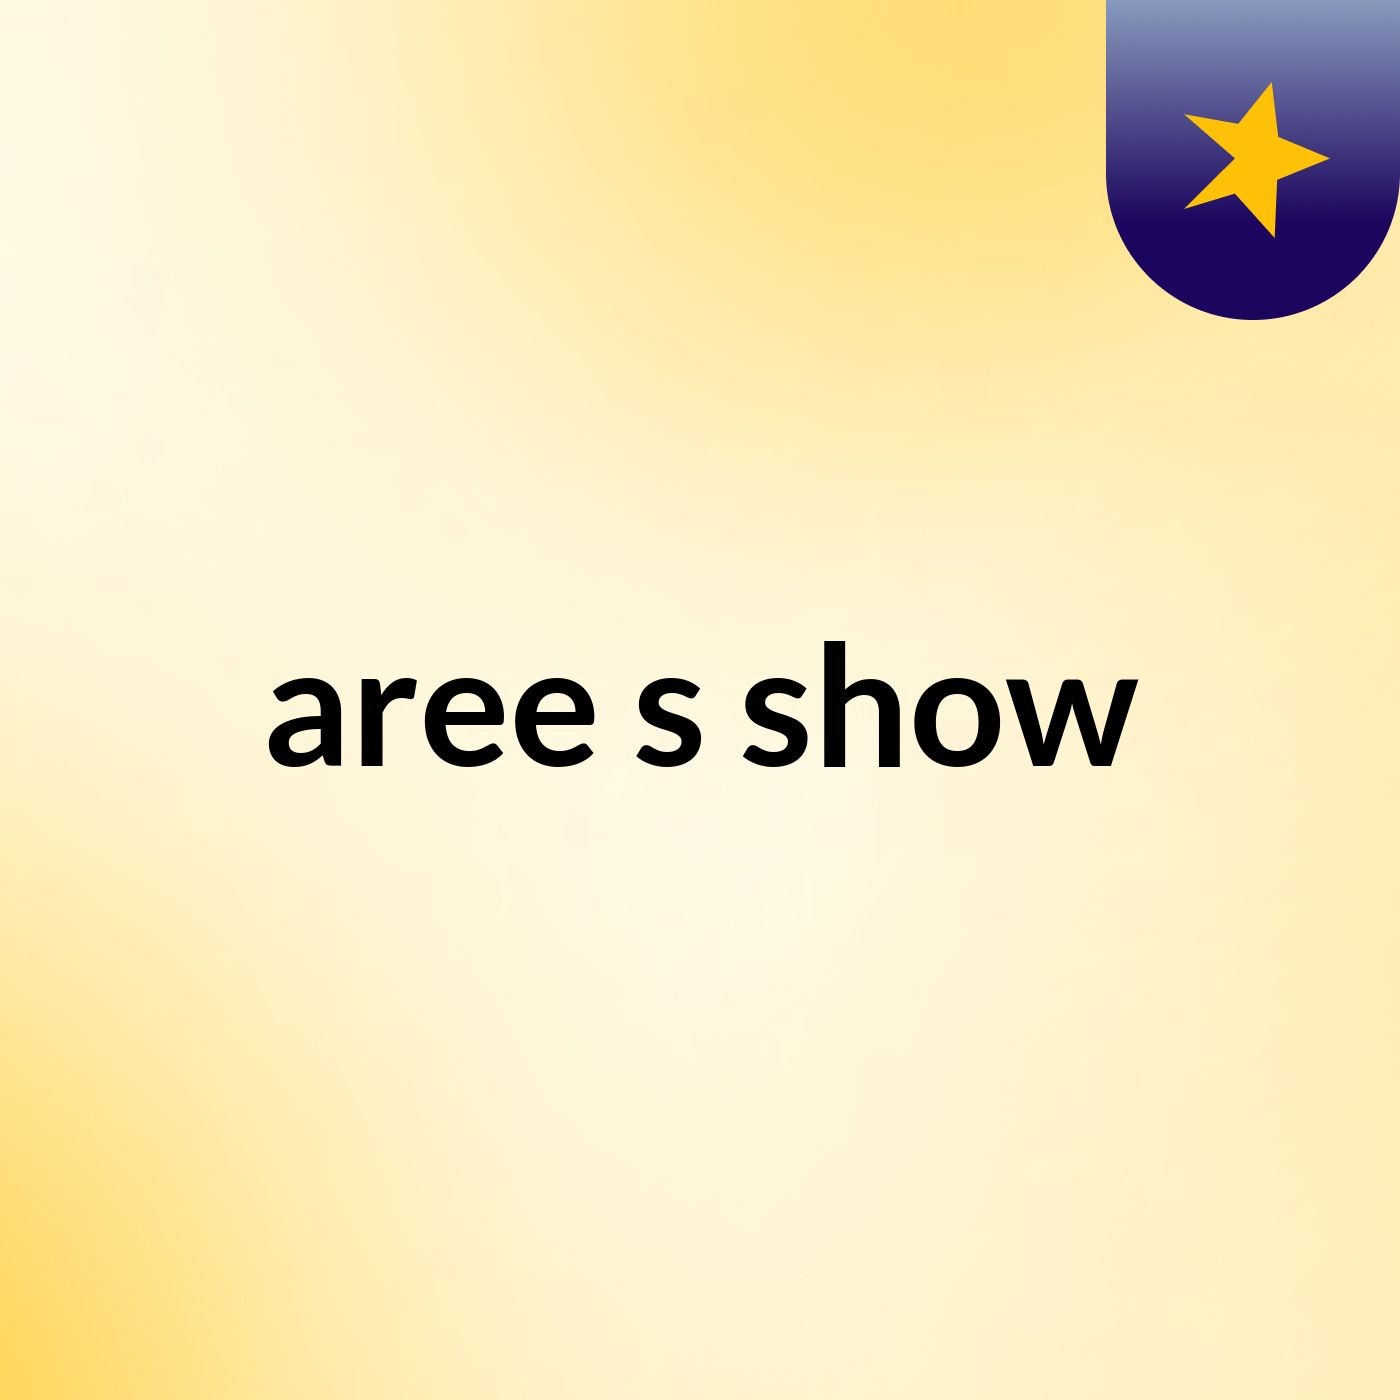 aree's show